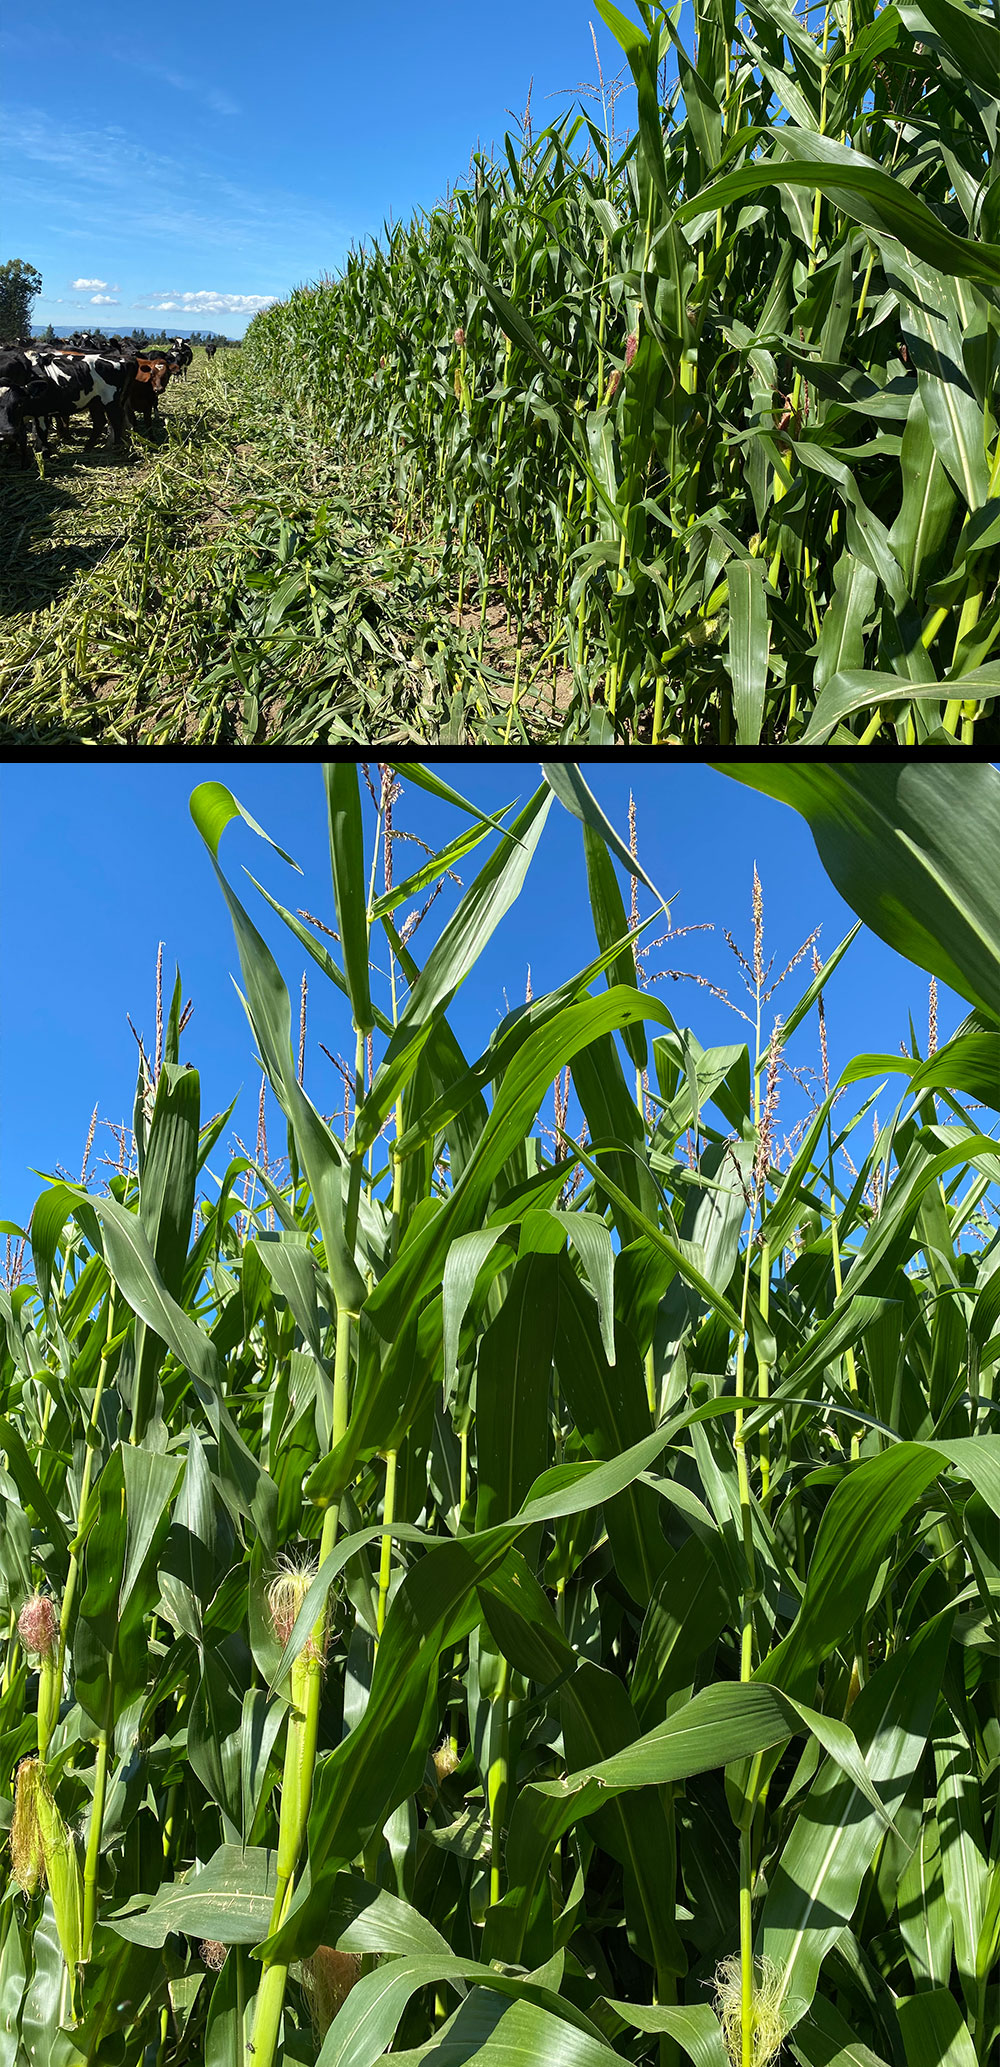 Healthy maize crop showing fast growth after farmed with BioActive Soils fertiliser